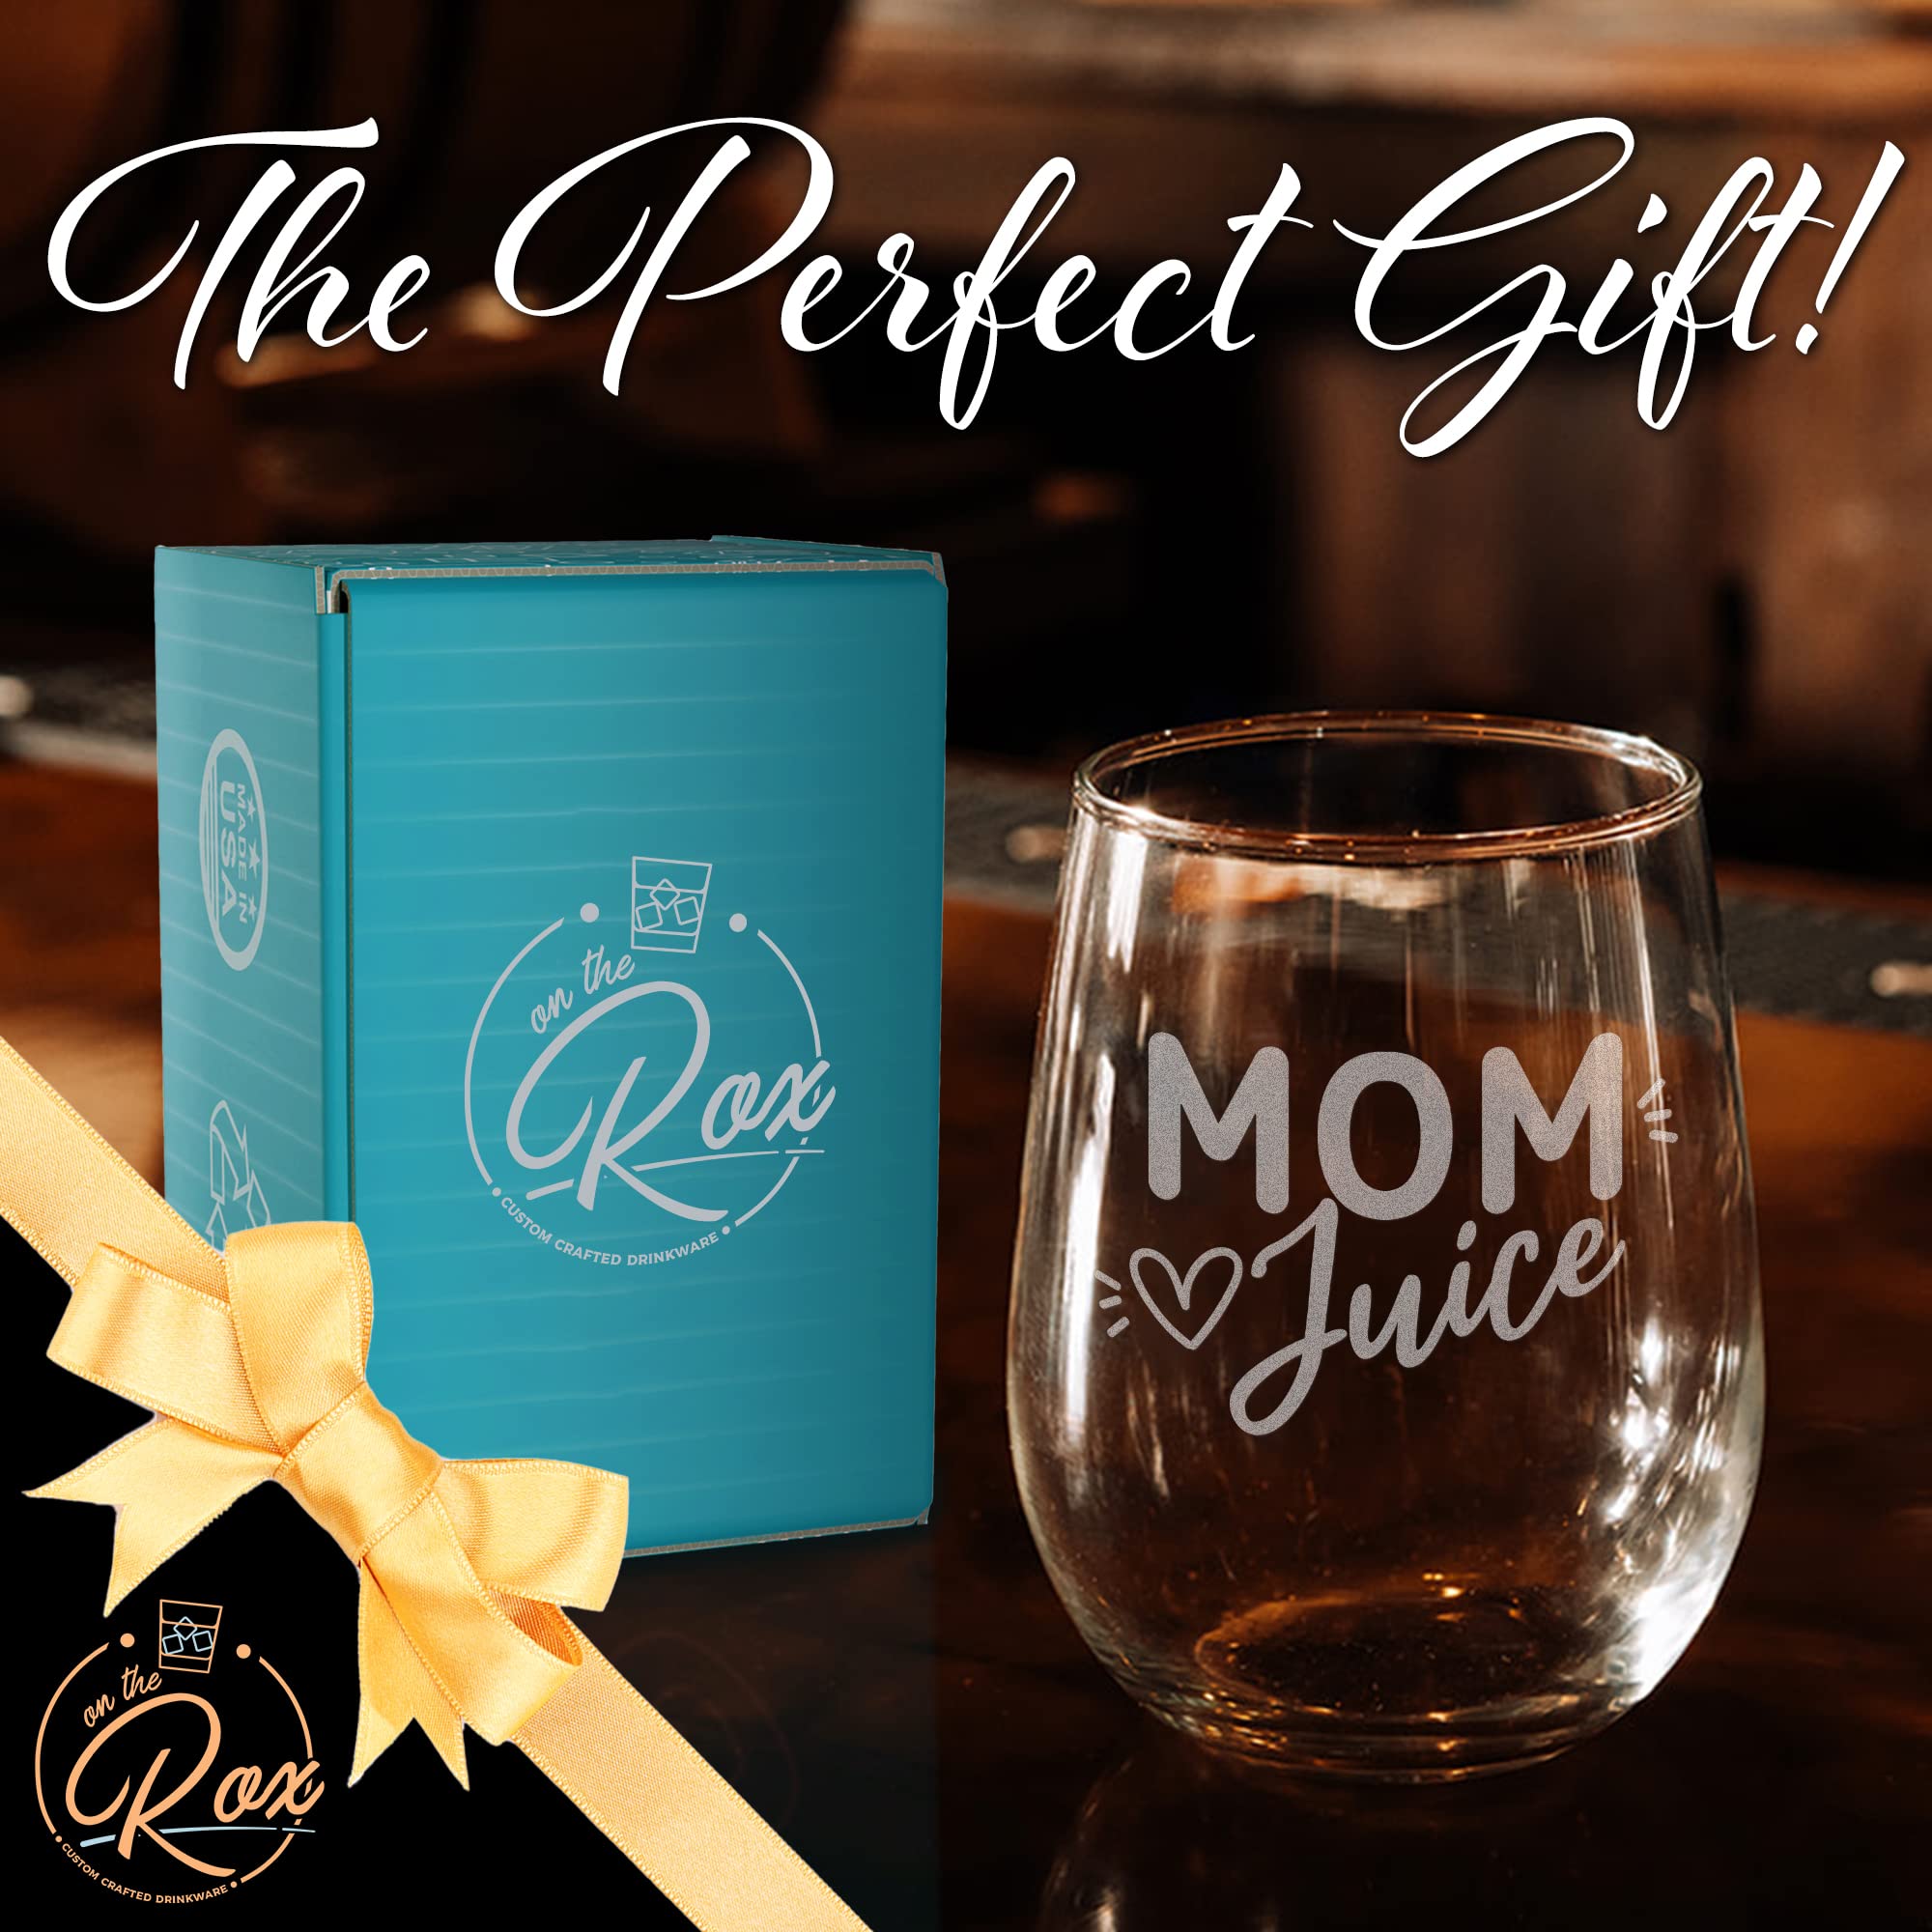 On The Rox Drinks Wine Gifts for Mom- 17Oz “Mom Juice” Engraved Stemless Wine Glass - Unique Funny Birthday, Mother’s Day Gifts for Mothers, Expecting Moms, Stepmoms